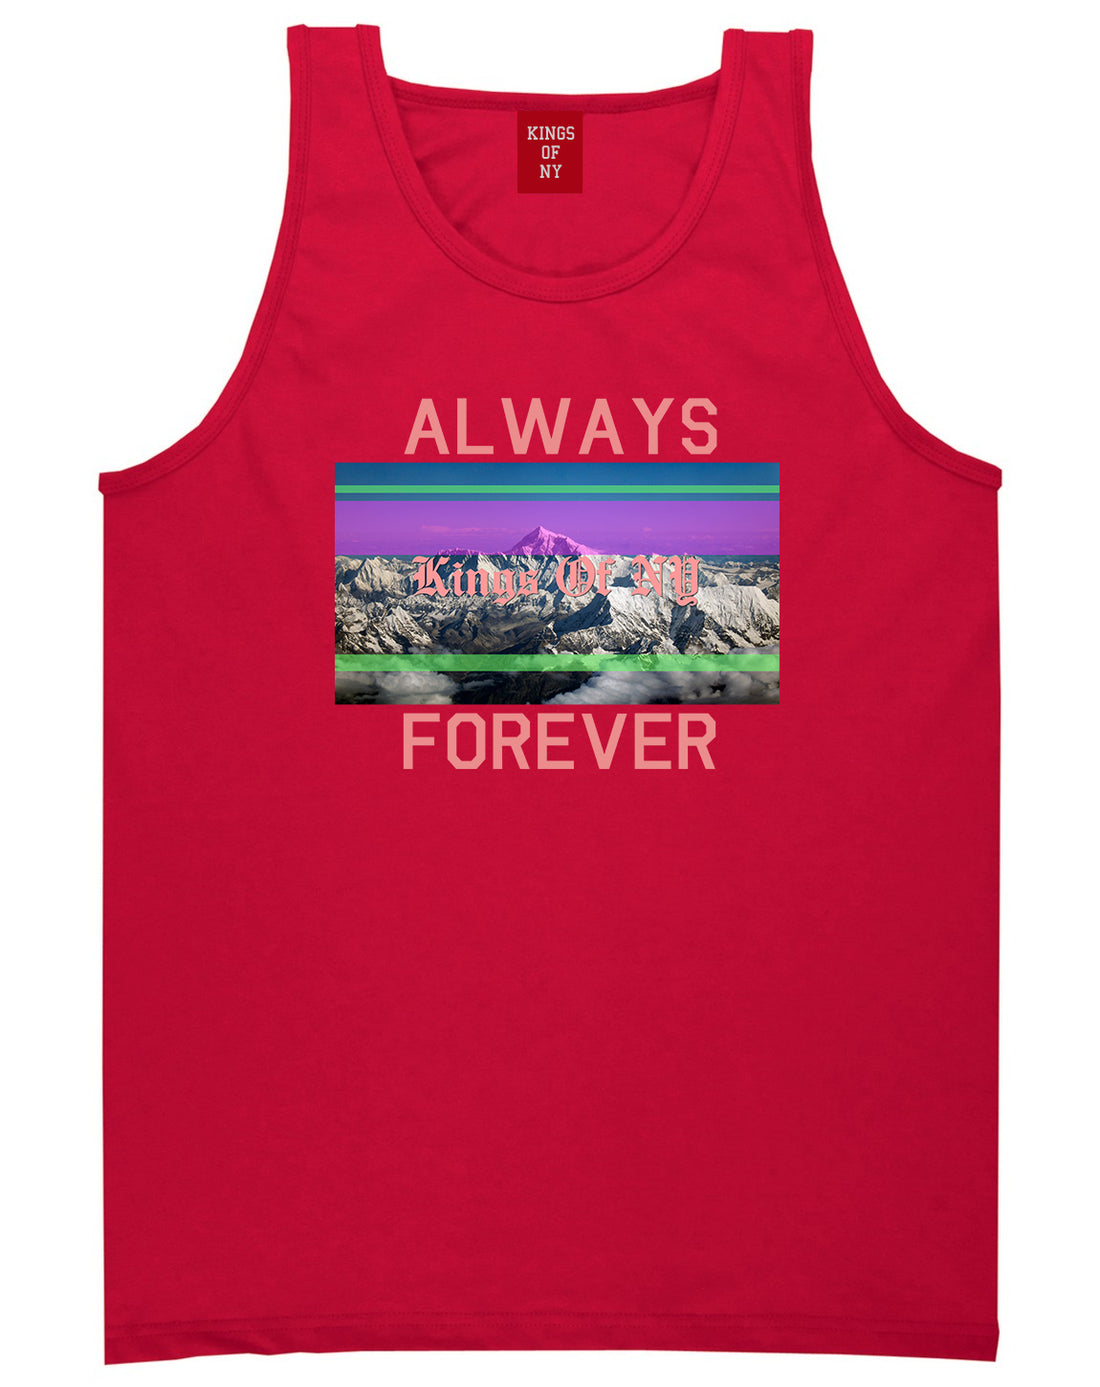 Mountains Always And Forever Mens Tank Top Shirt Red by Kings Of NY